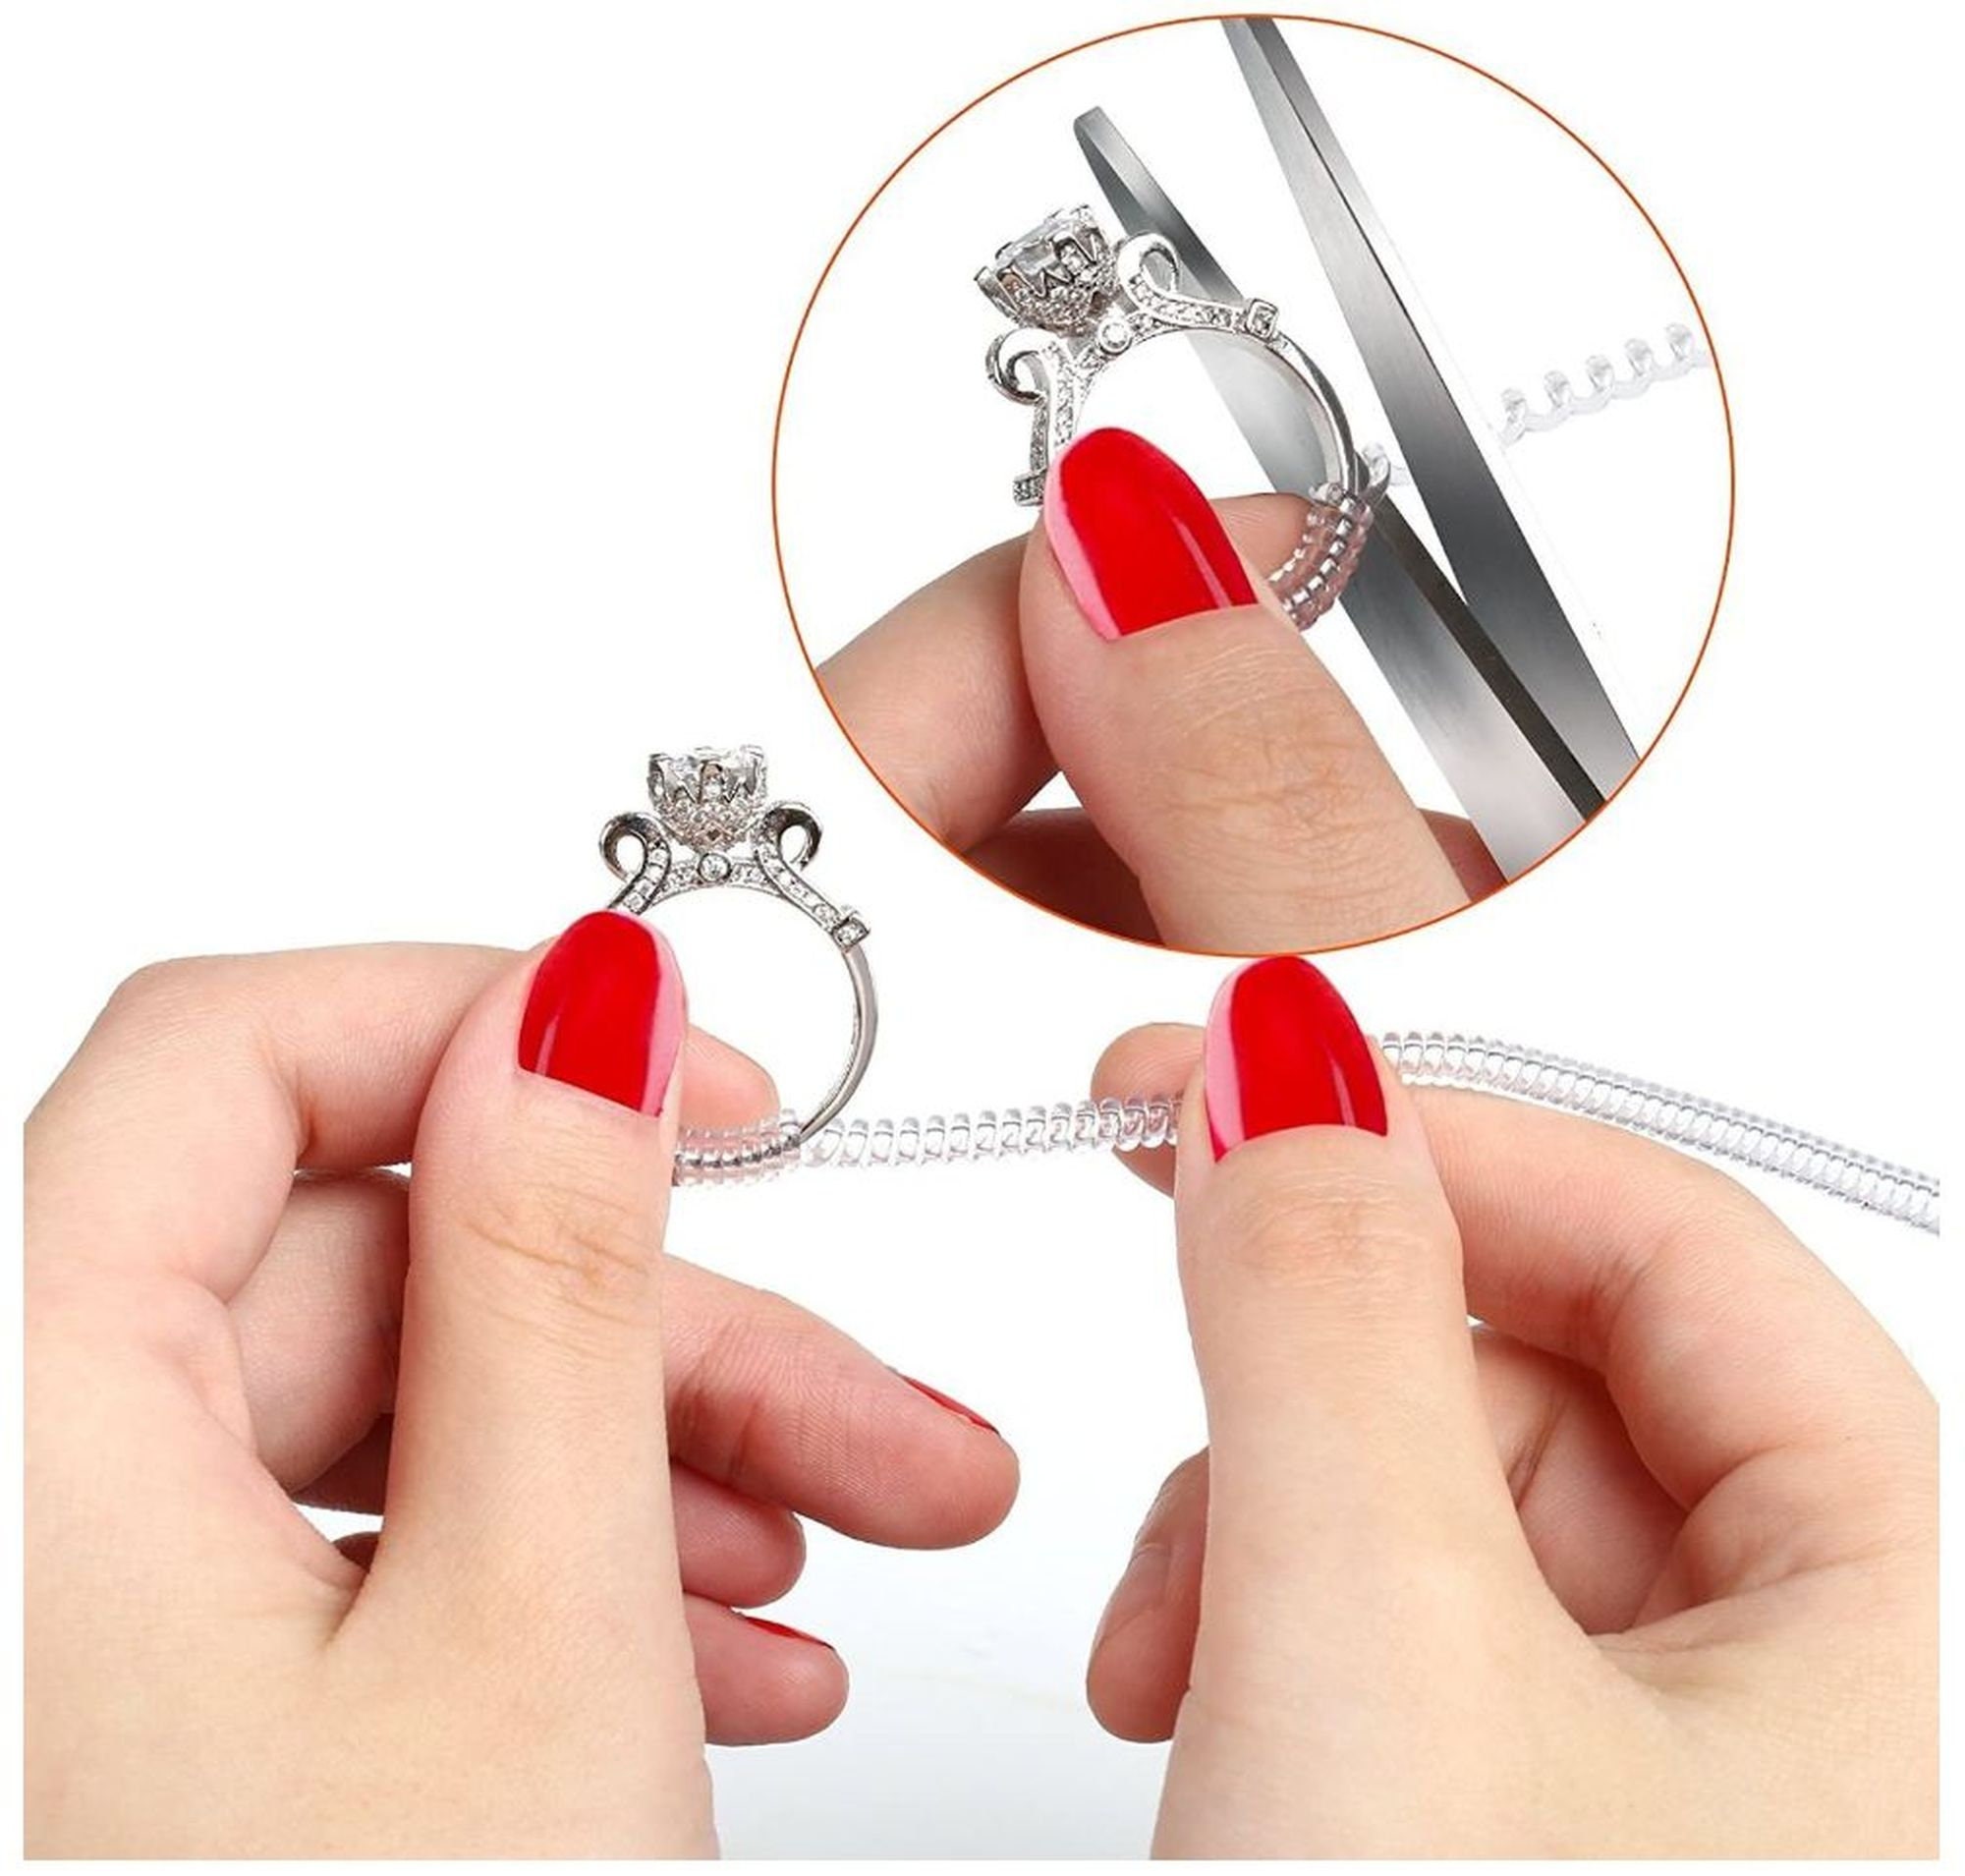 5 STARS UNITED Ring Sizer Adjuster for Loose Rings - – Silicone Ring Size  Adjuster